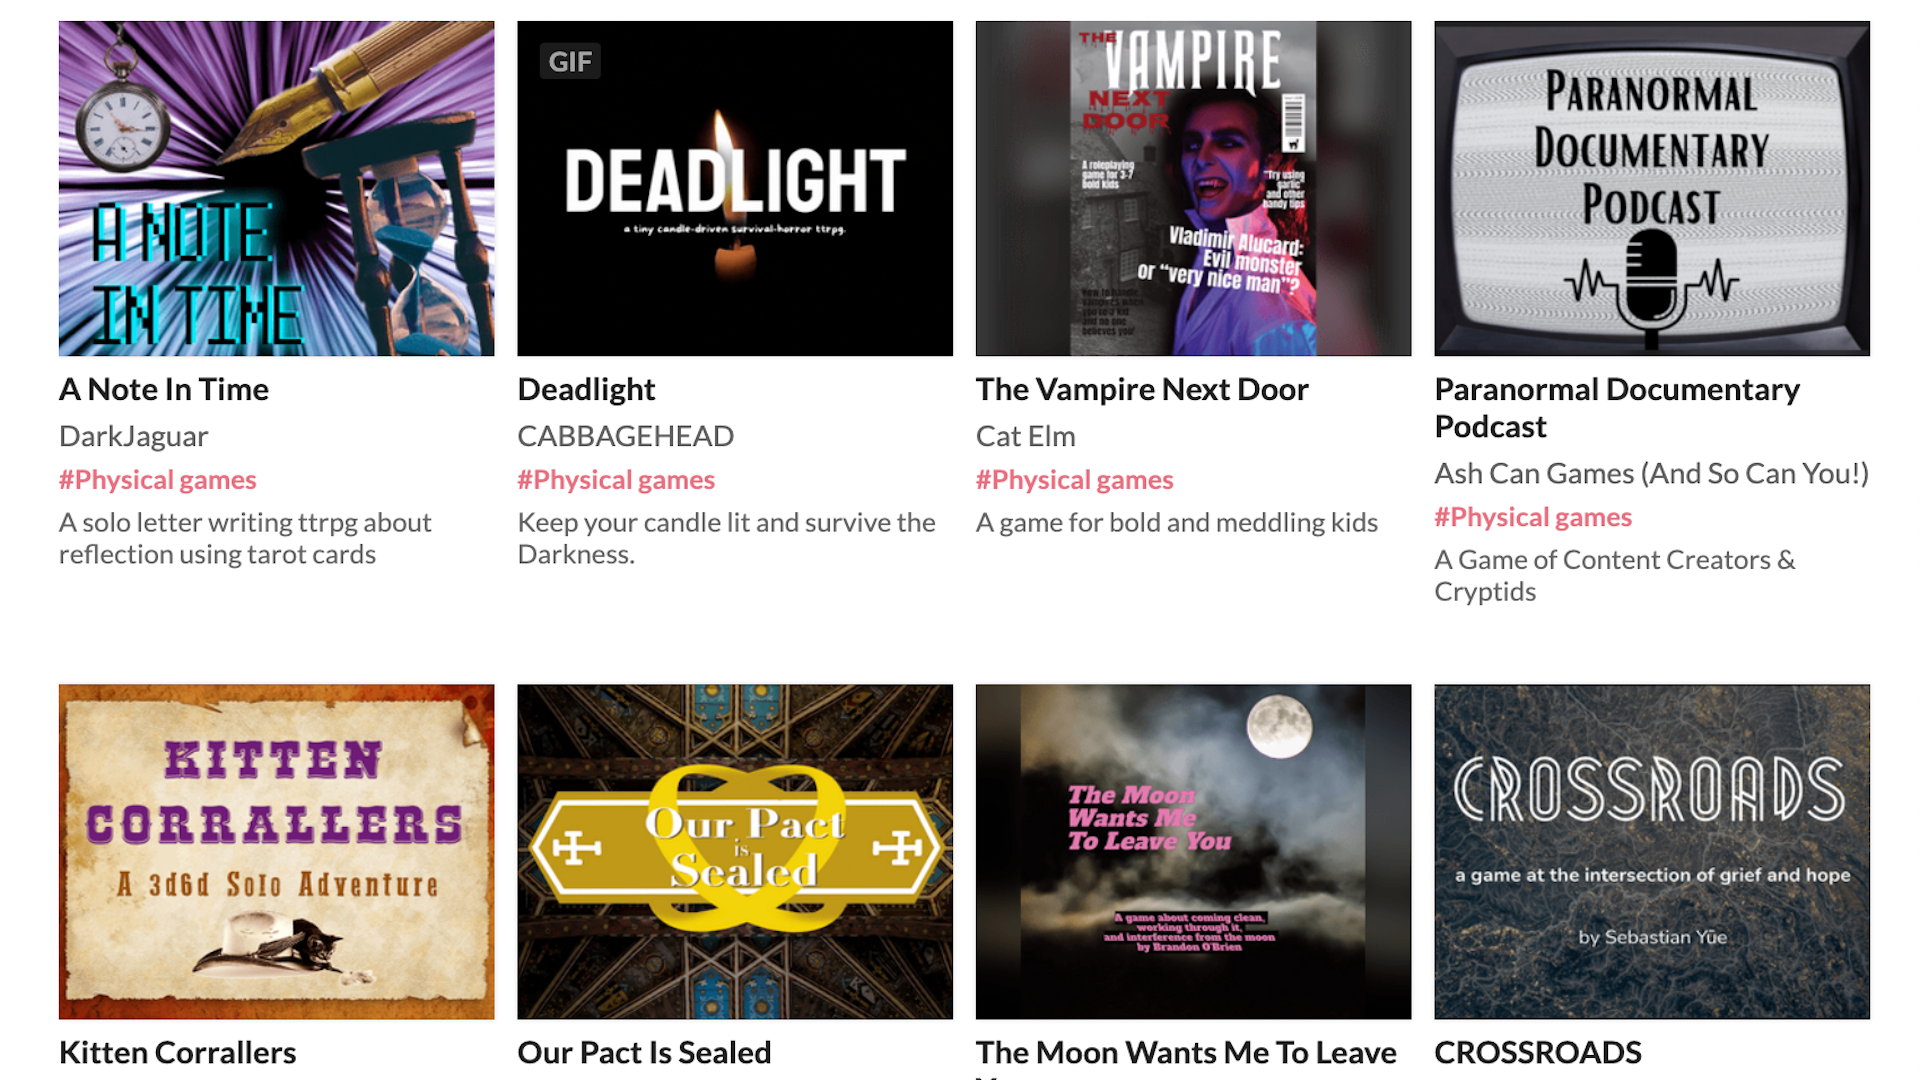 The Queer Games Bundle on Itch.io bundles nearly 600 titles in an effort to crowdfund a living wage for independent artists in the tabletop space.